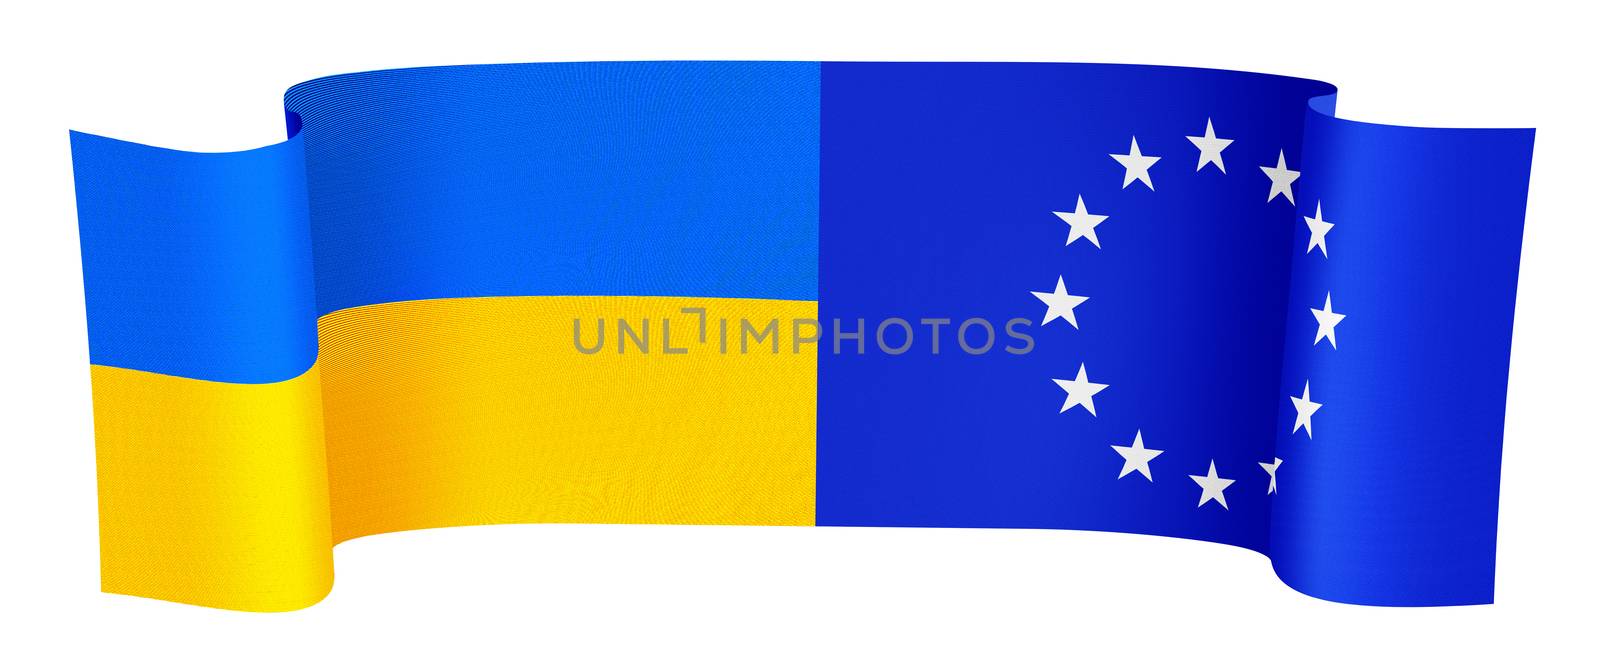 illustration of the UA and EU flags on white background